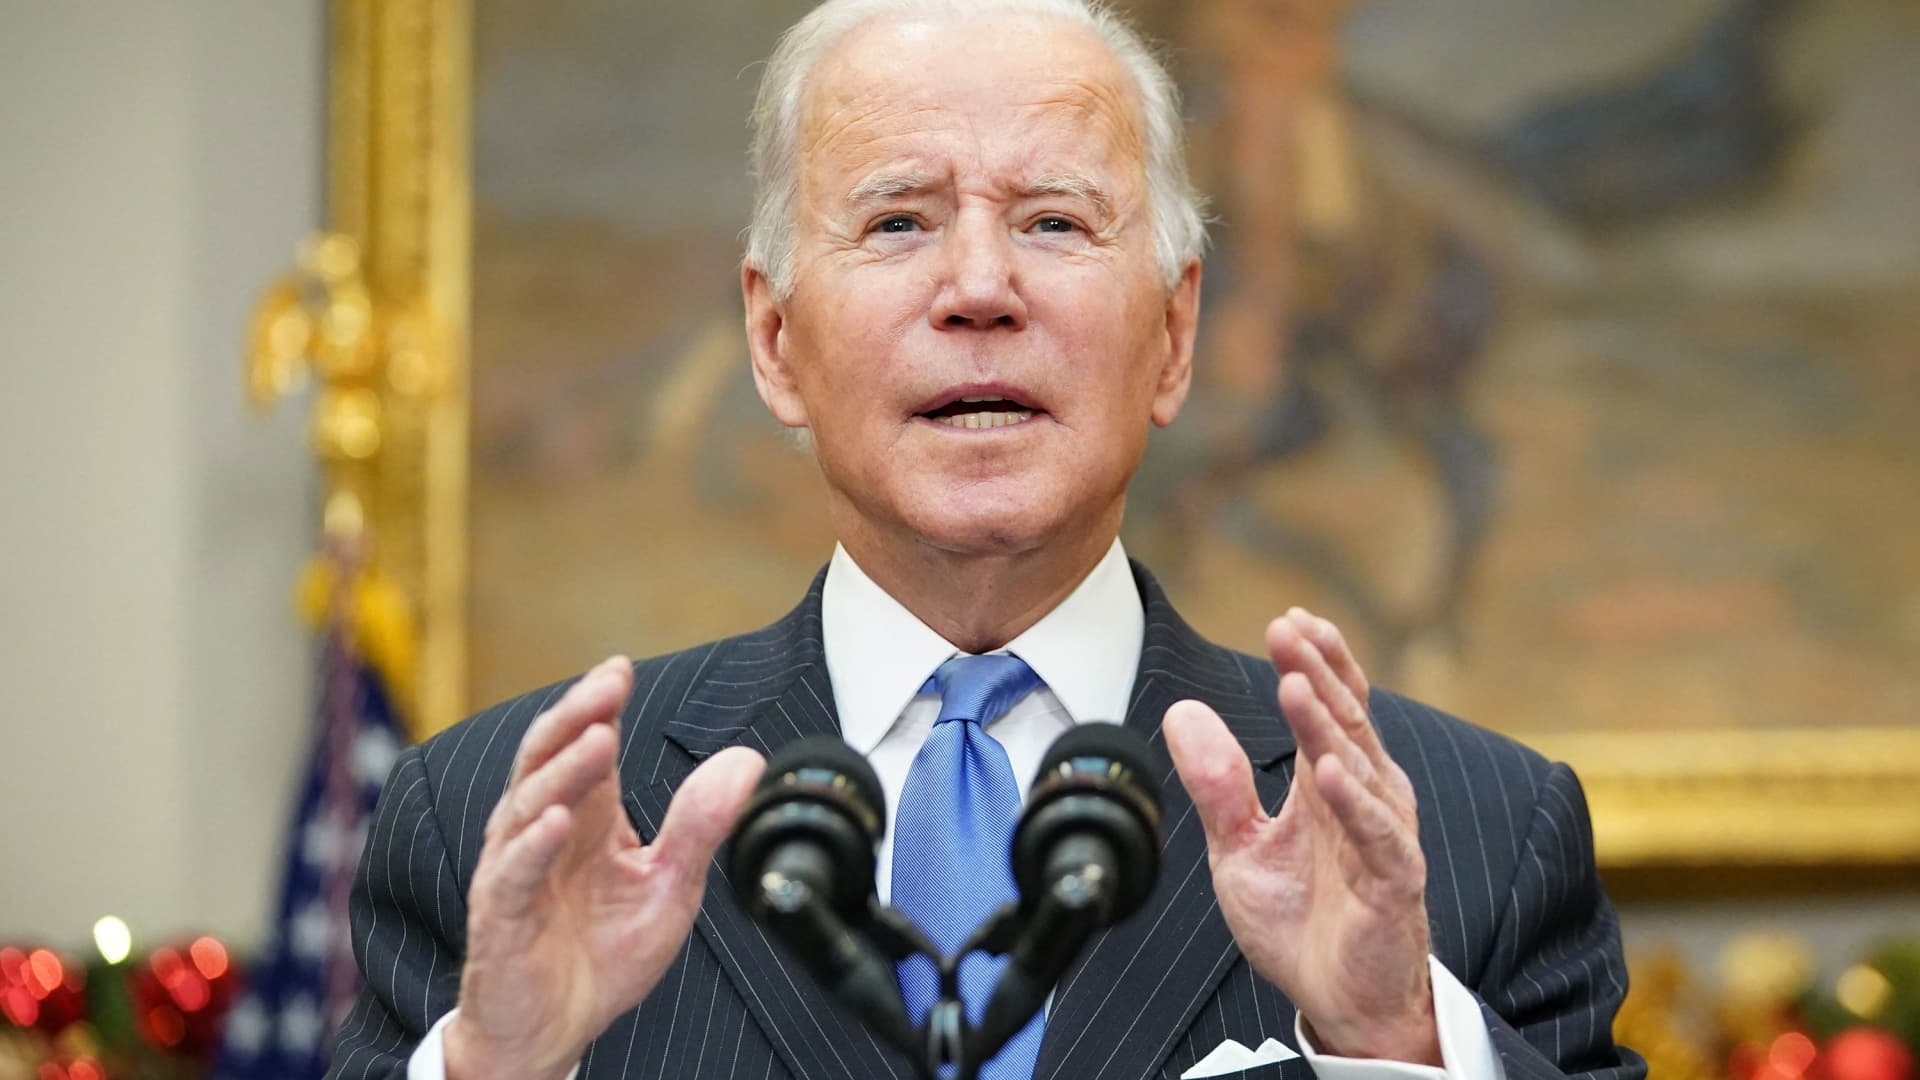 US President Joe Biden delivers remarks to provide an update on the Omicron variant in the Roosevelt Room of the White House in Washington, DC on November 29, 2021.